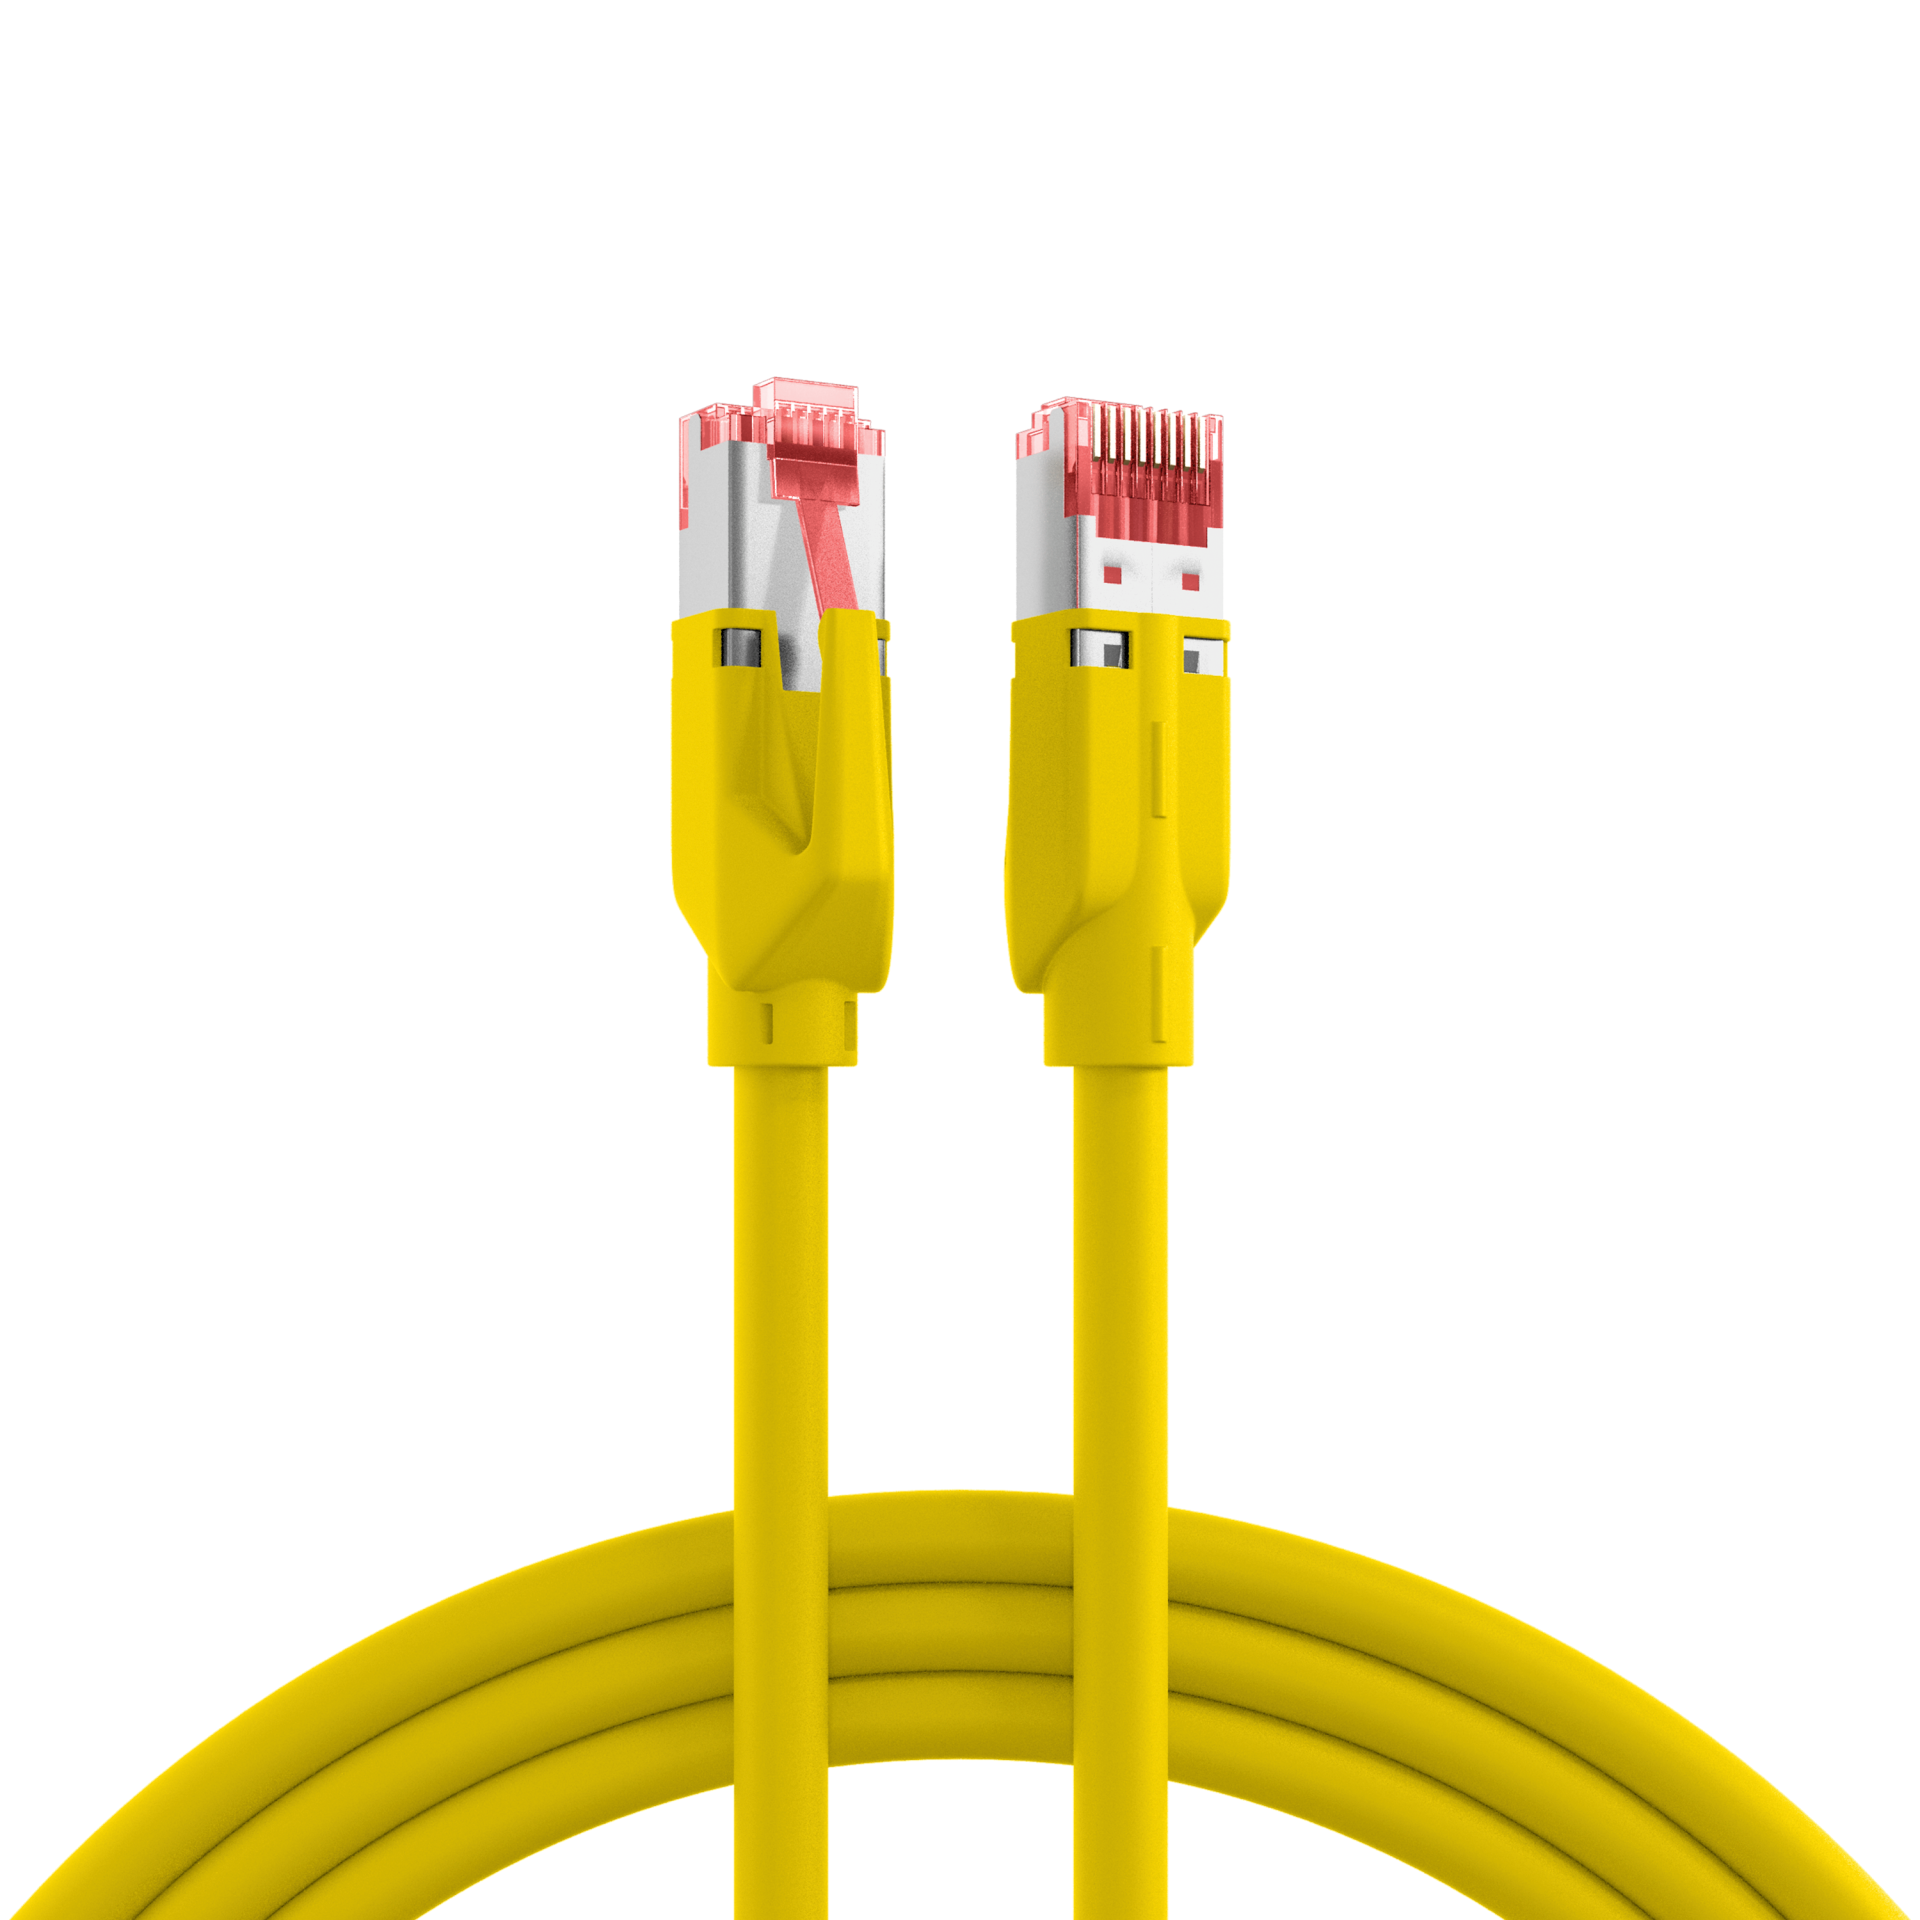 RJ45 Patch Cord Cat.5e SF/UTP PURTM21 for drag chains yellow 10m